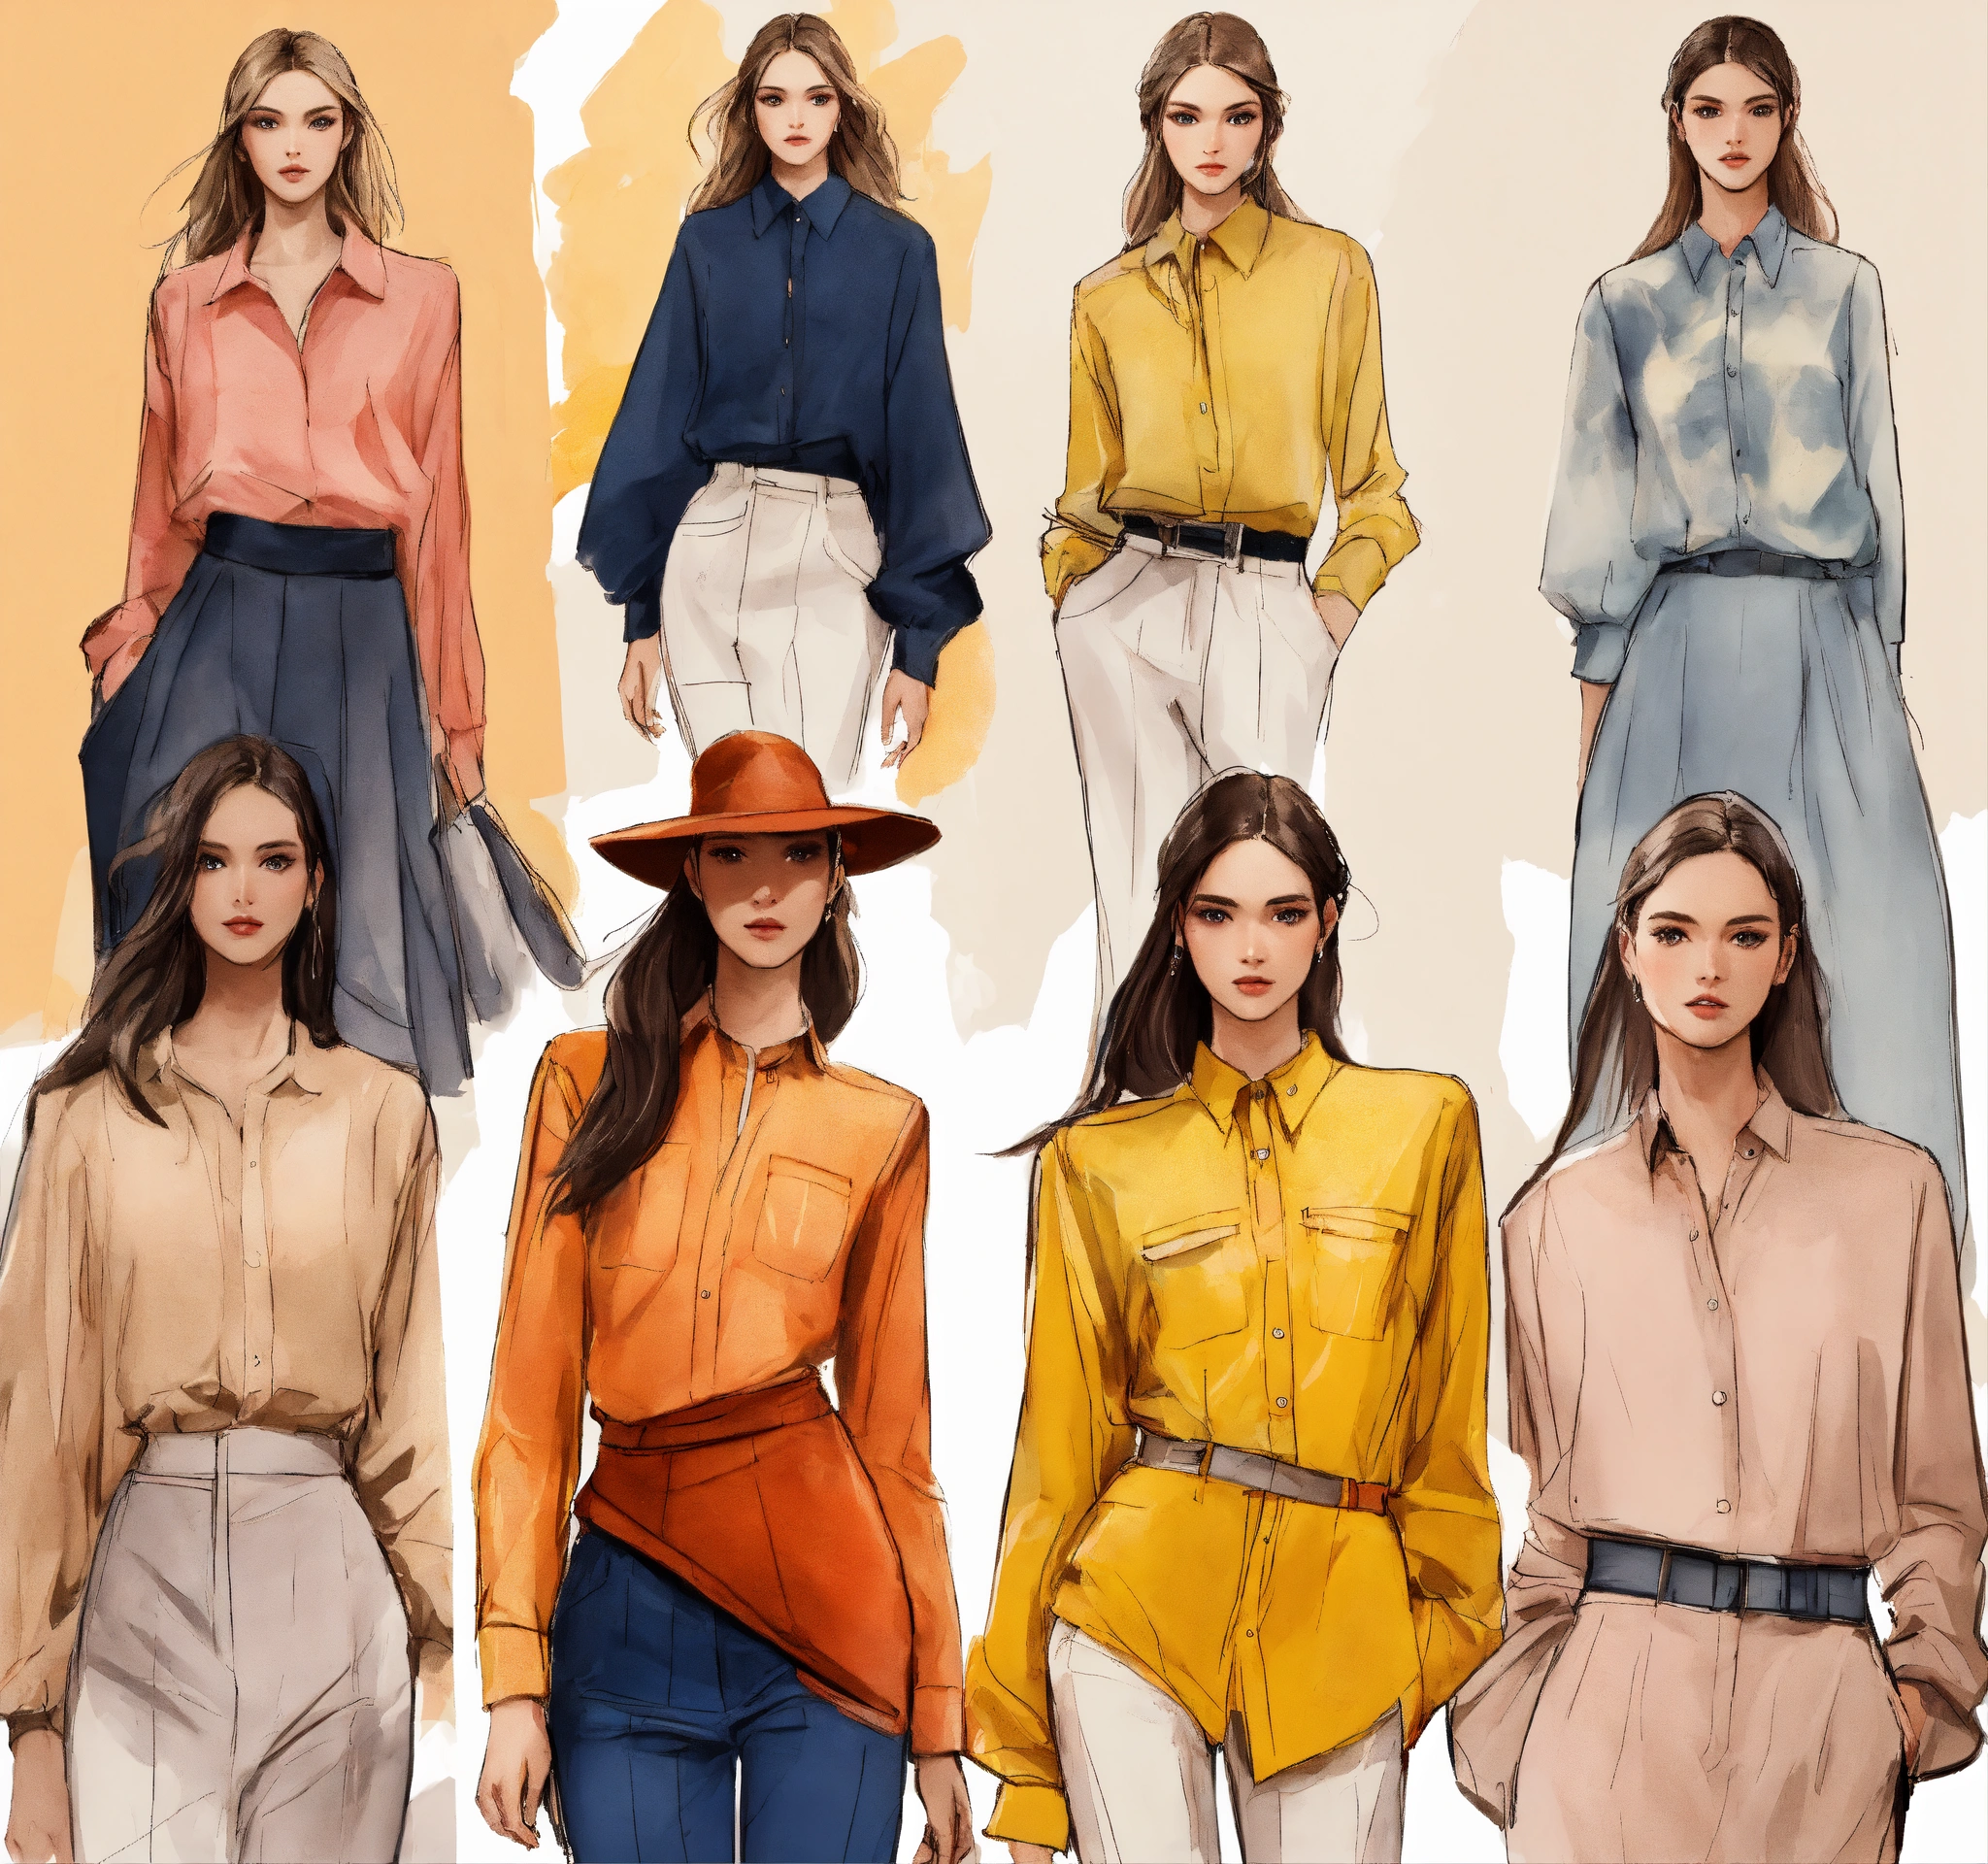 Lexica - Fashion illustrations, 12 different designs, rough sketches ...